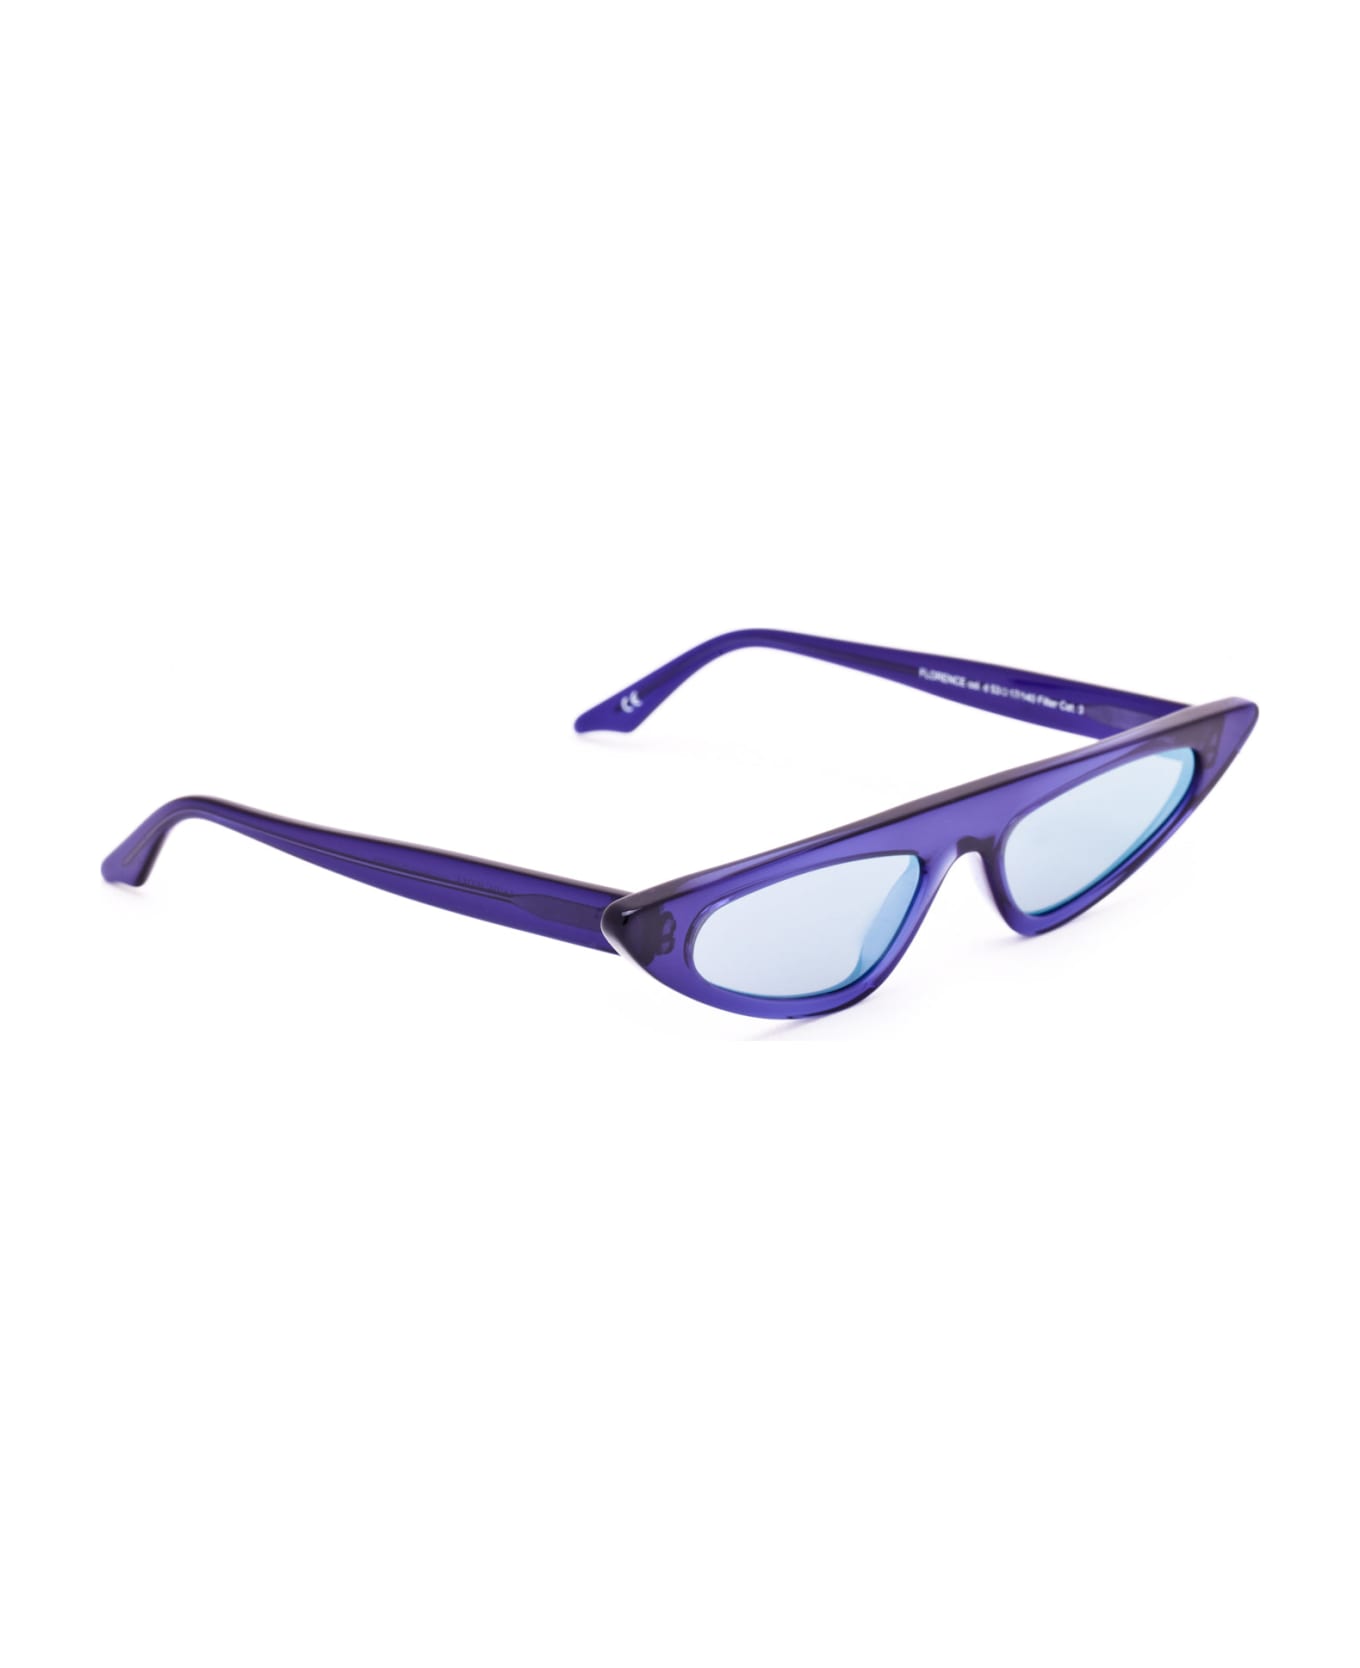 Andy Wolf Florence-d Sunglasses - purple